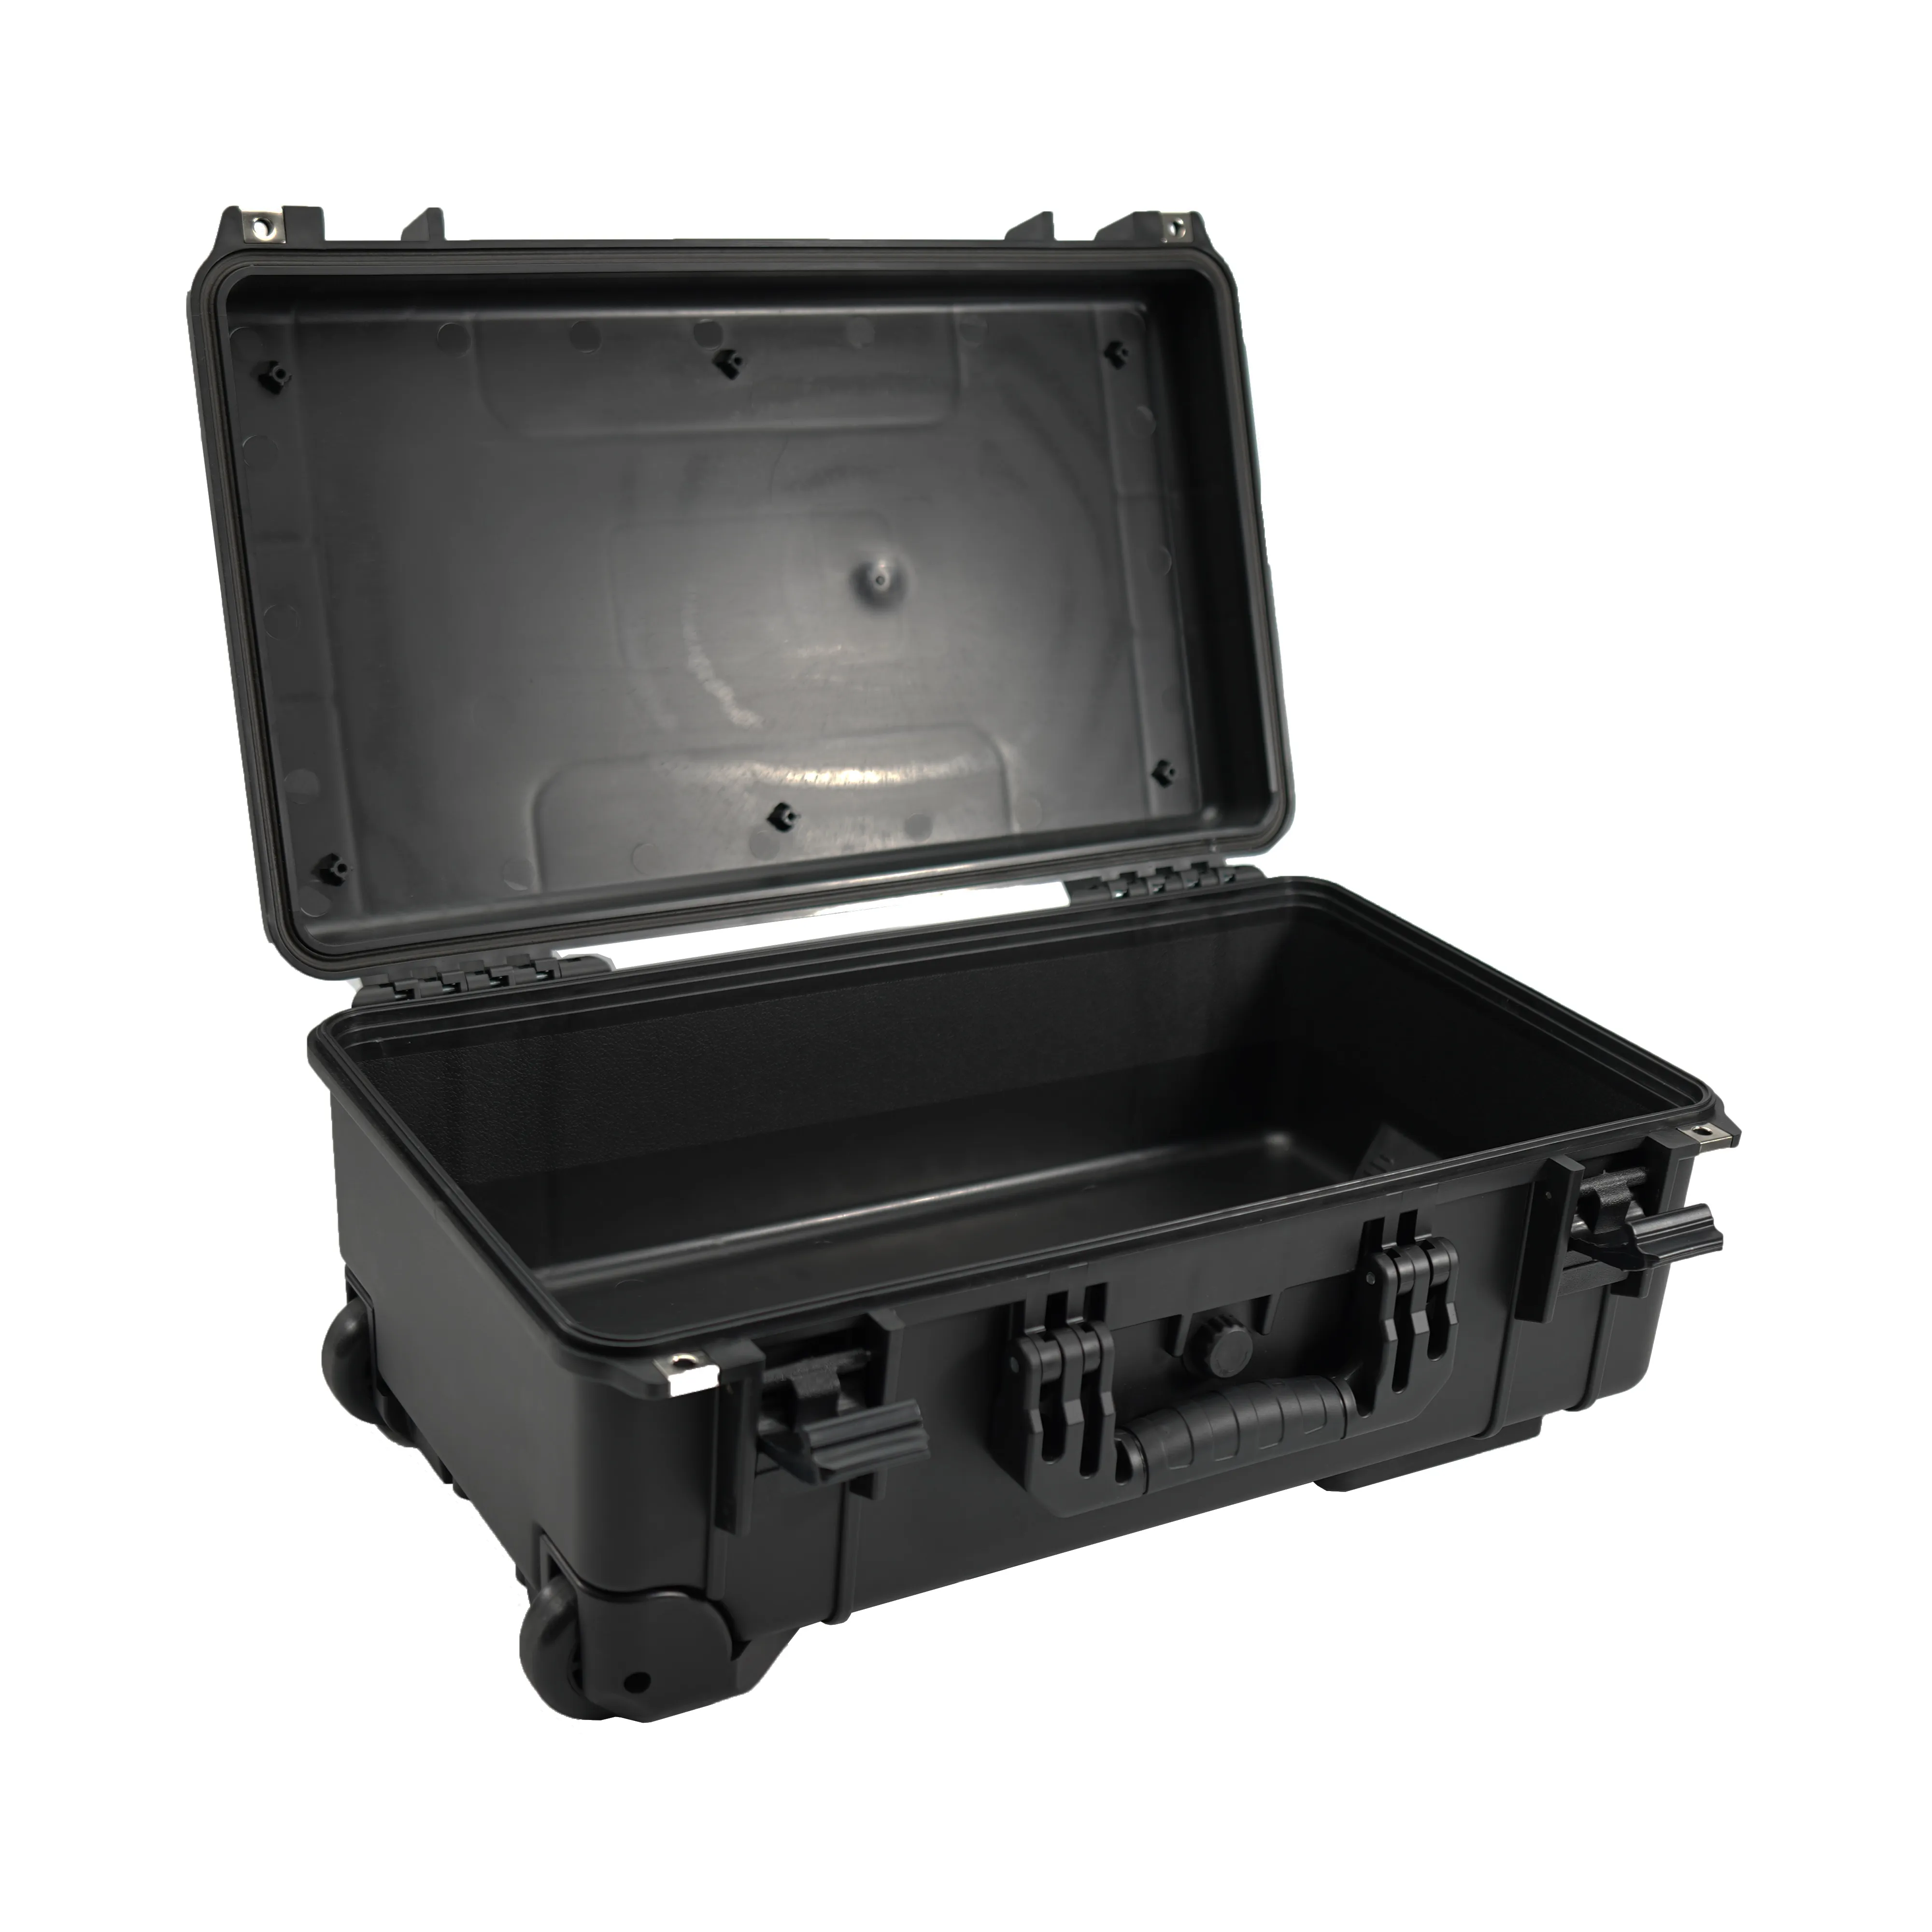 Heavy Duty safety equipment case plastic Carrying Case With Handle waterproof tool box shockproof wheeled case